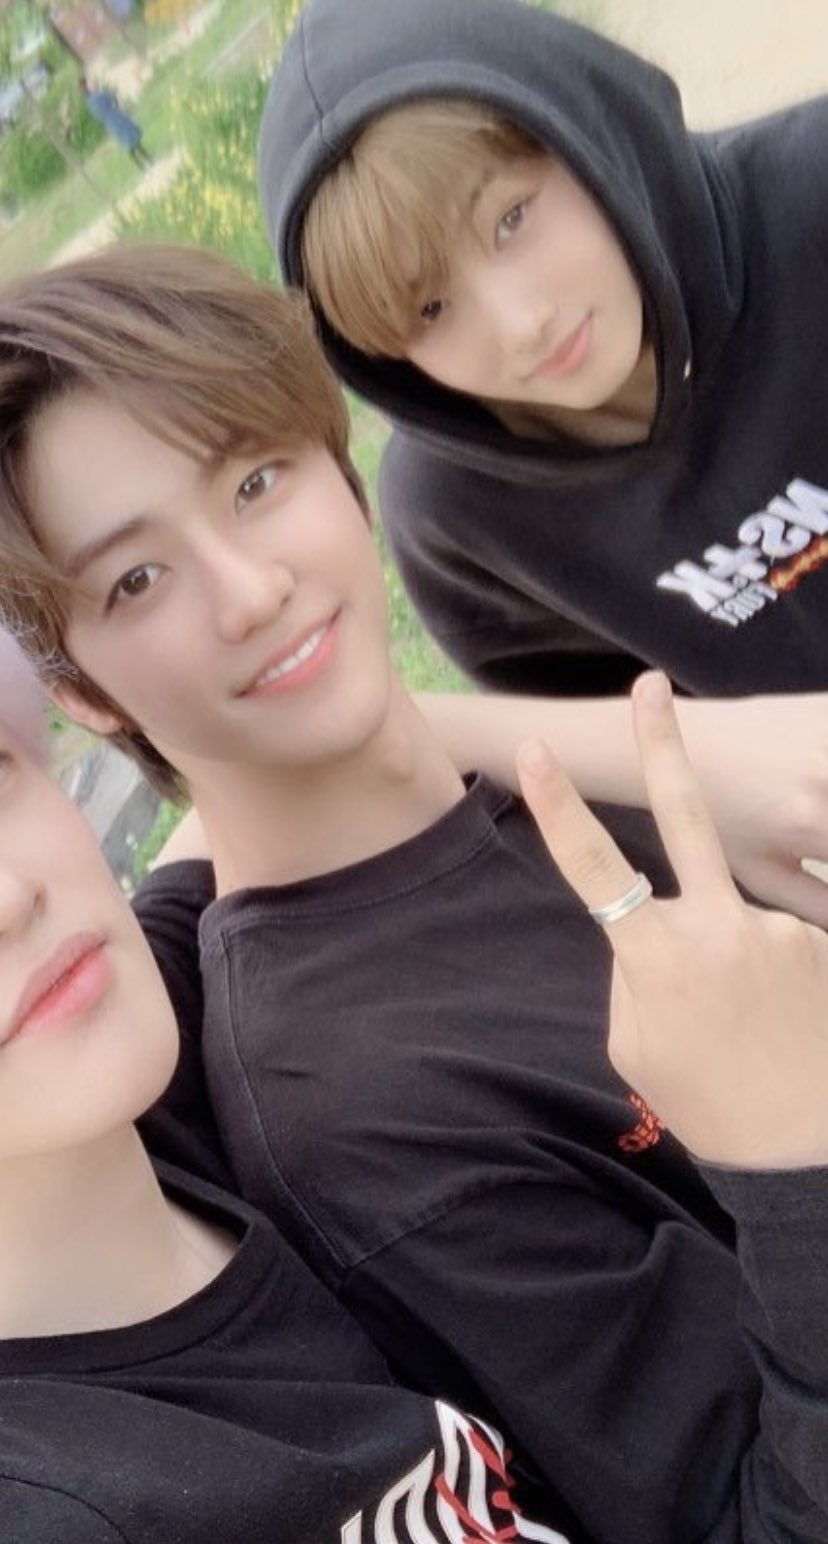 jaemin pics on X: jaemin is still connected to unicef 🥺 he's wearing  their hope ring  / X